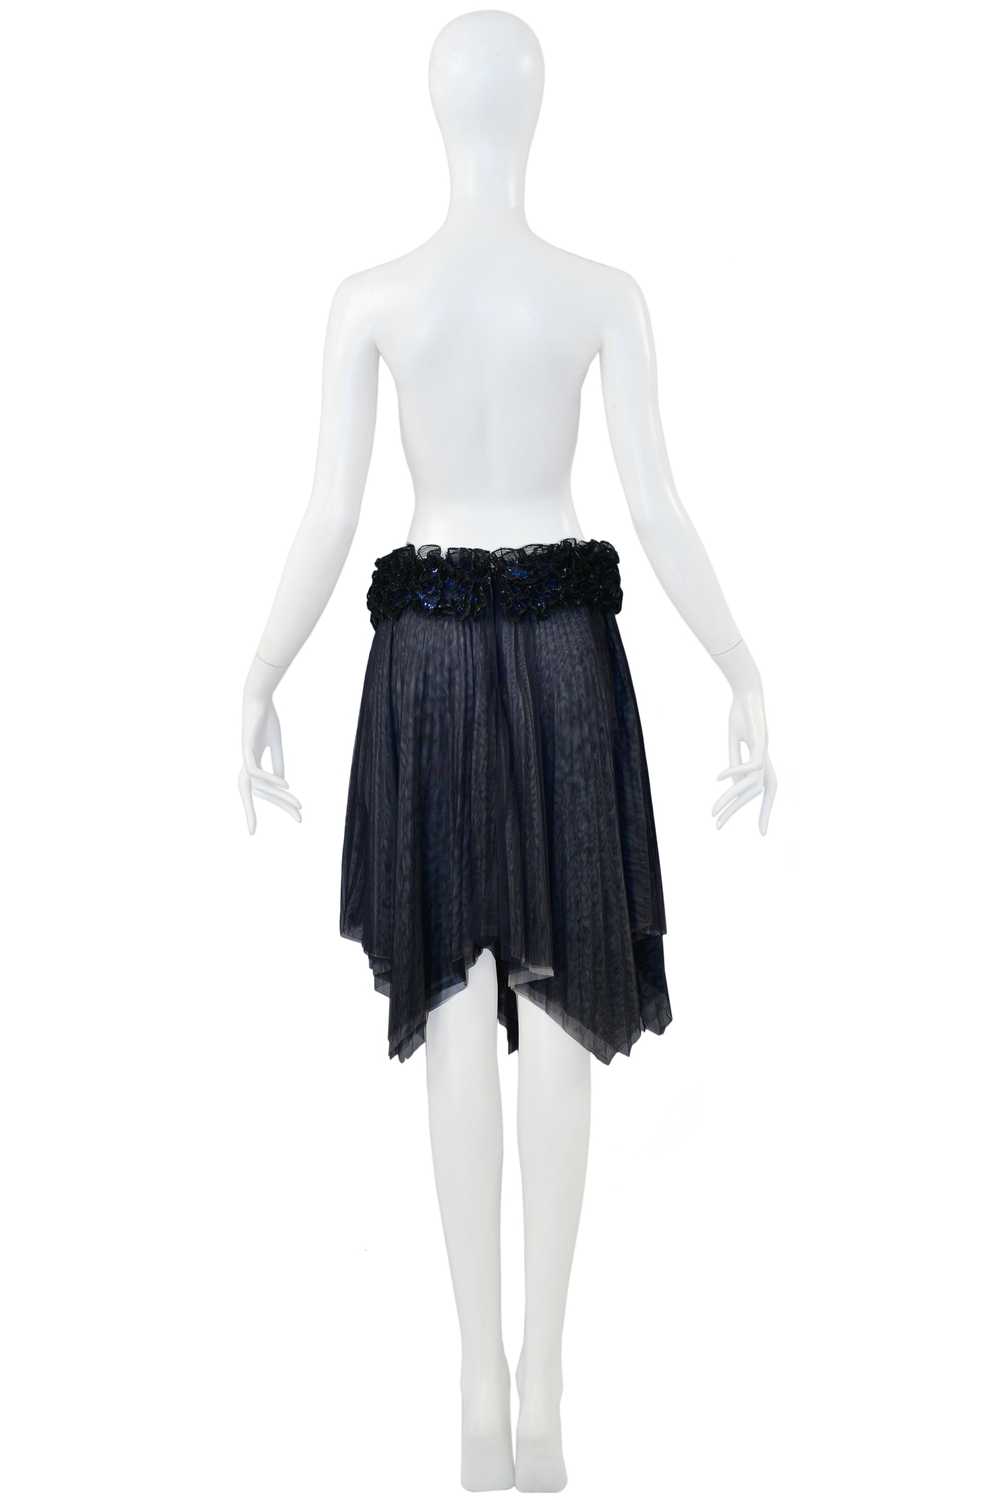 CHANEL PLEATED SKIRT WITH FLORAL SEQUIN WAISTBAND - image 5